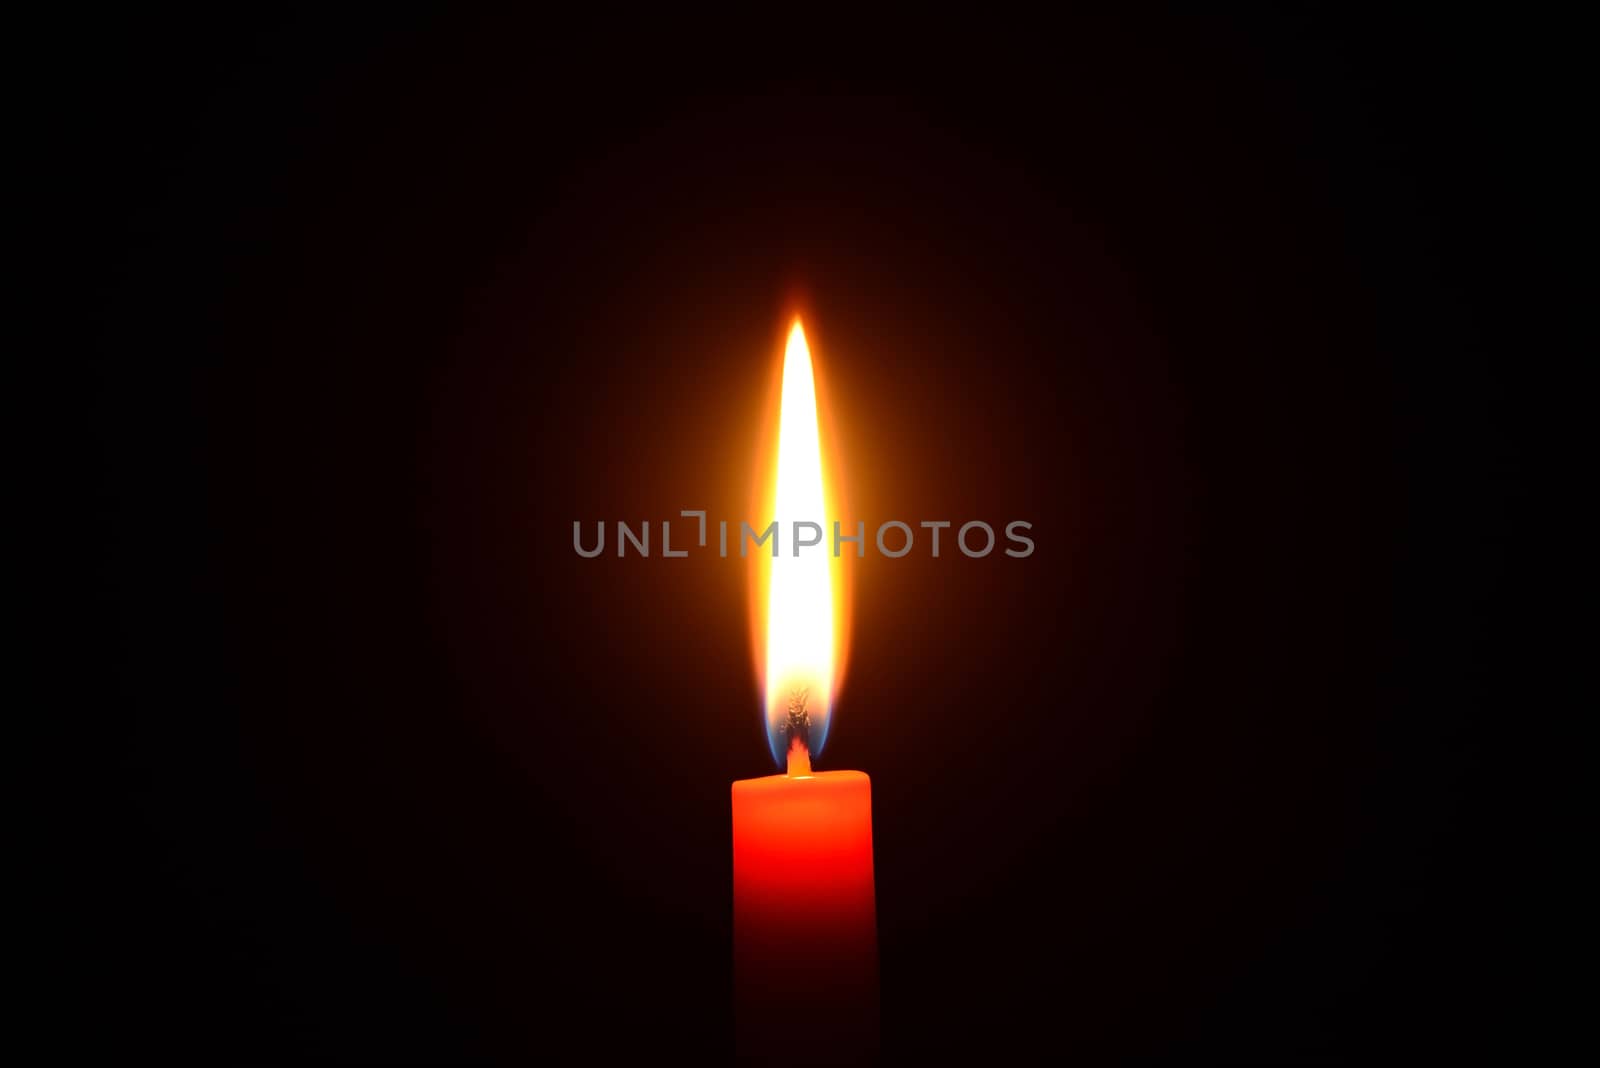 Photo of an red candle burning on a black background.